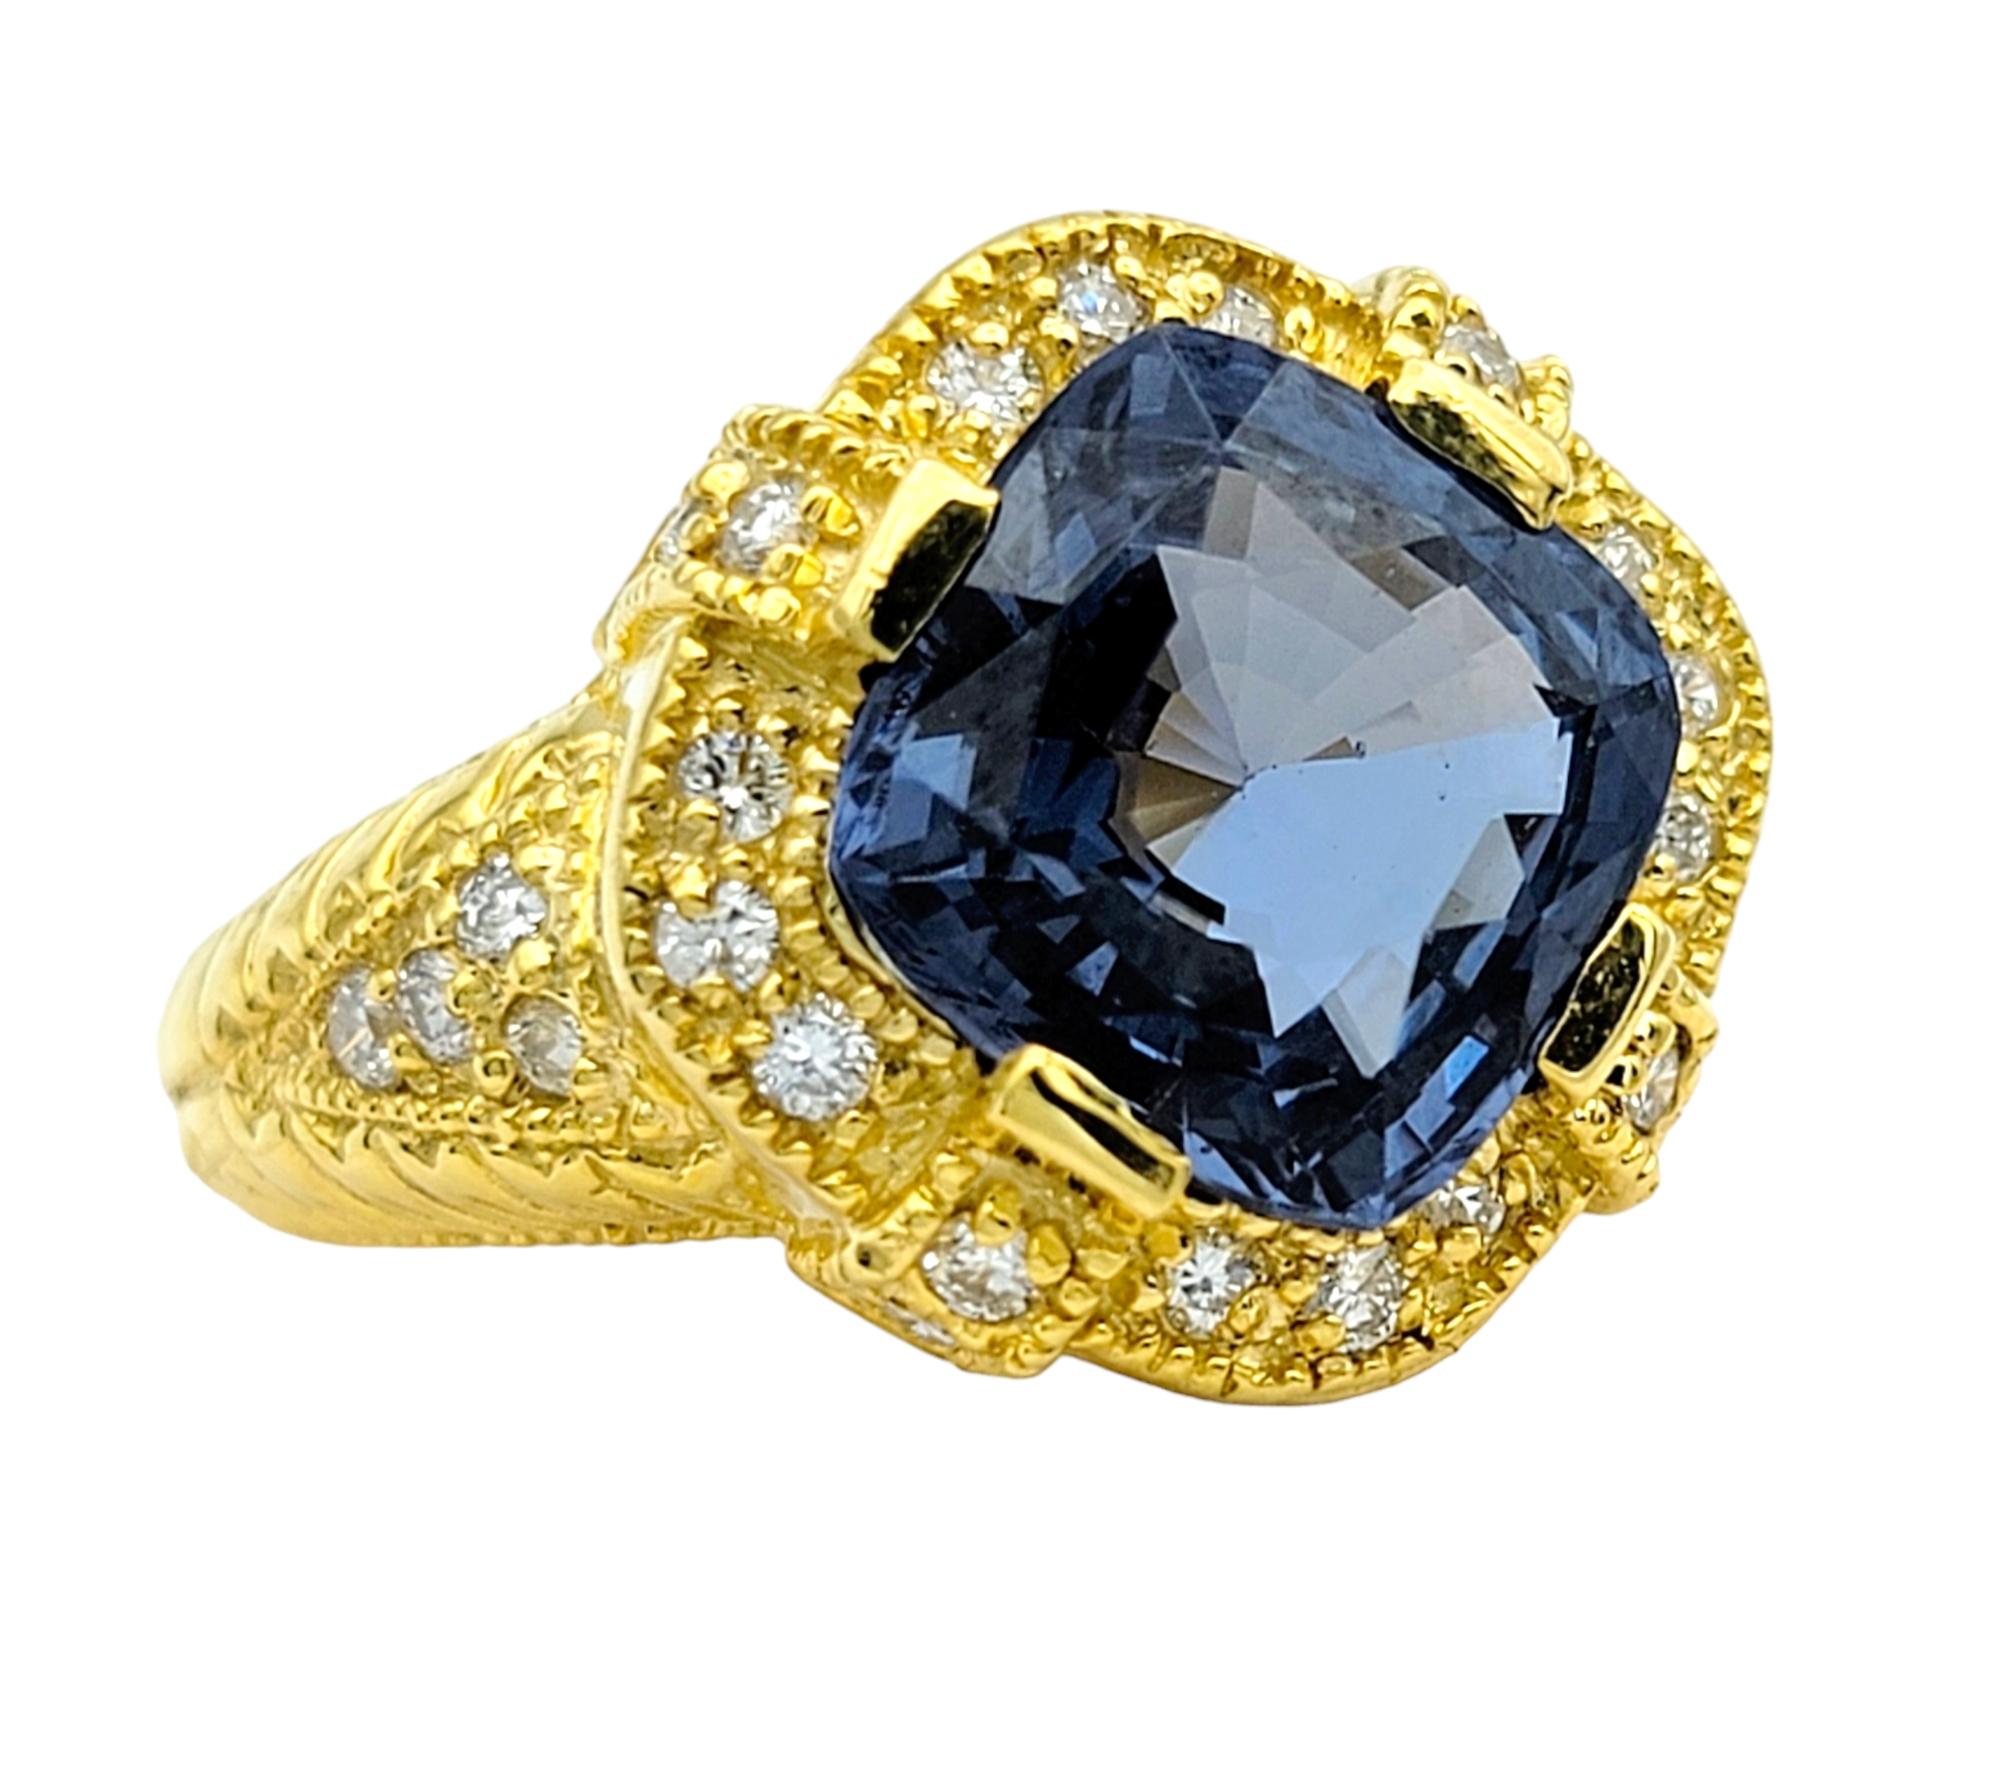 Ring Size: 5.75

Exuding elegance and sophistication, this glorious ring showcases a stunning blue cushion spinel embraced by a sparkling halo of diamonds, all set in luxurious 18 karat yellow gold. The vivid hue of the spinel captivates the eye,